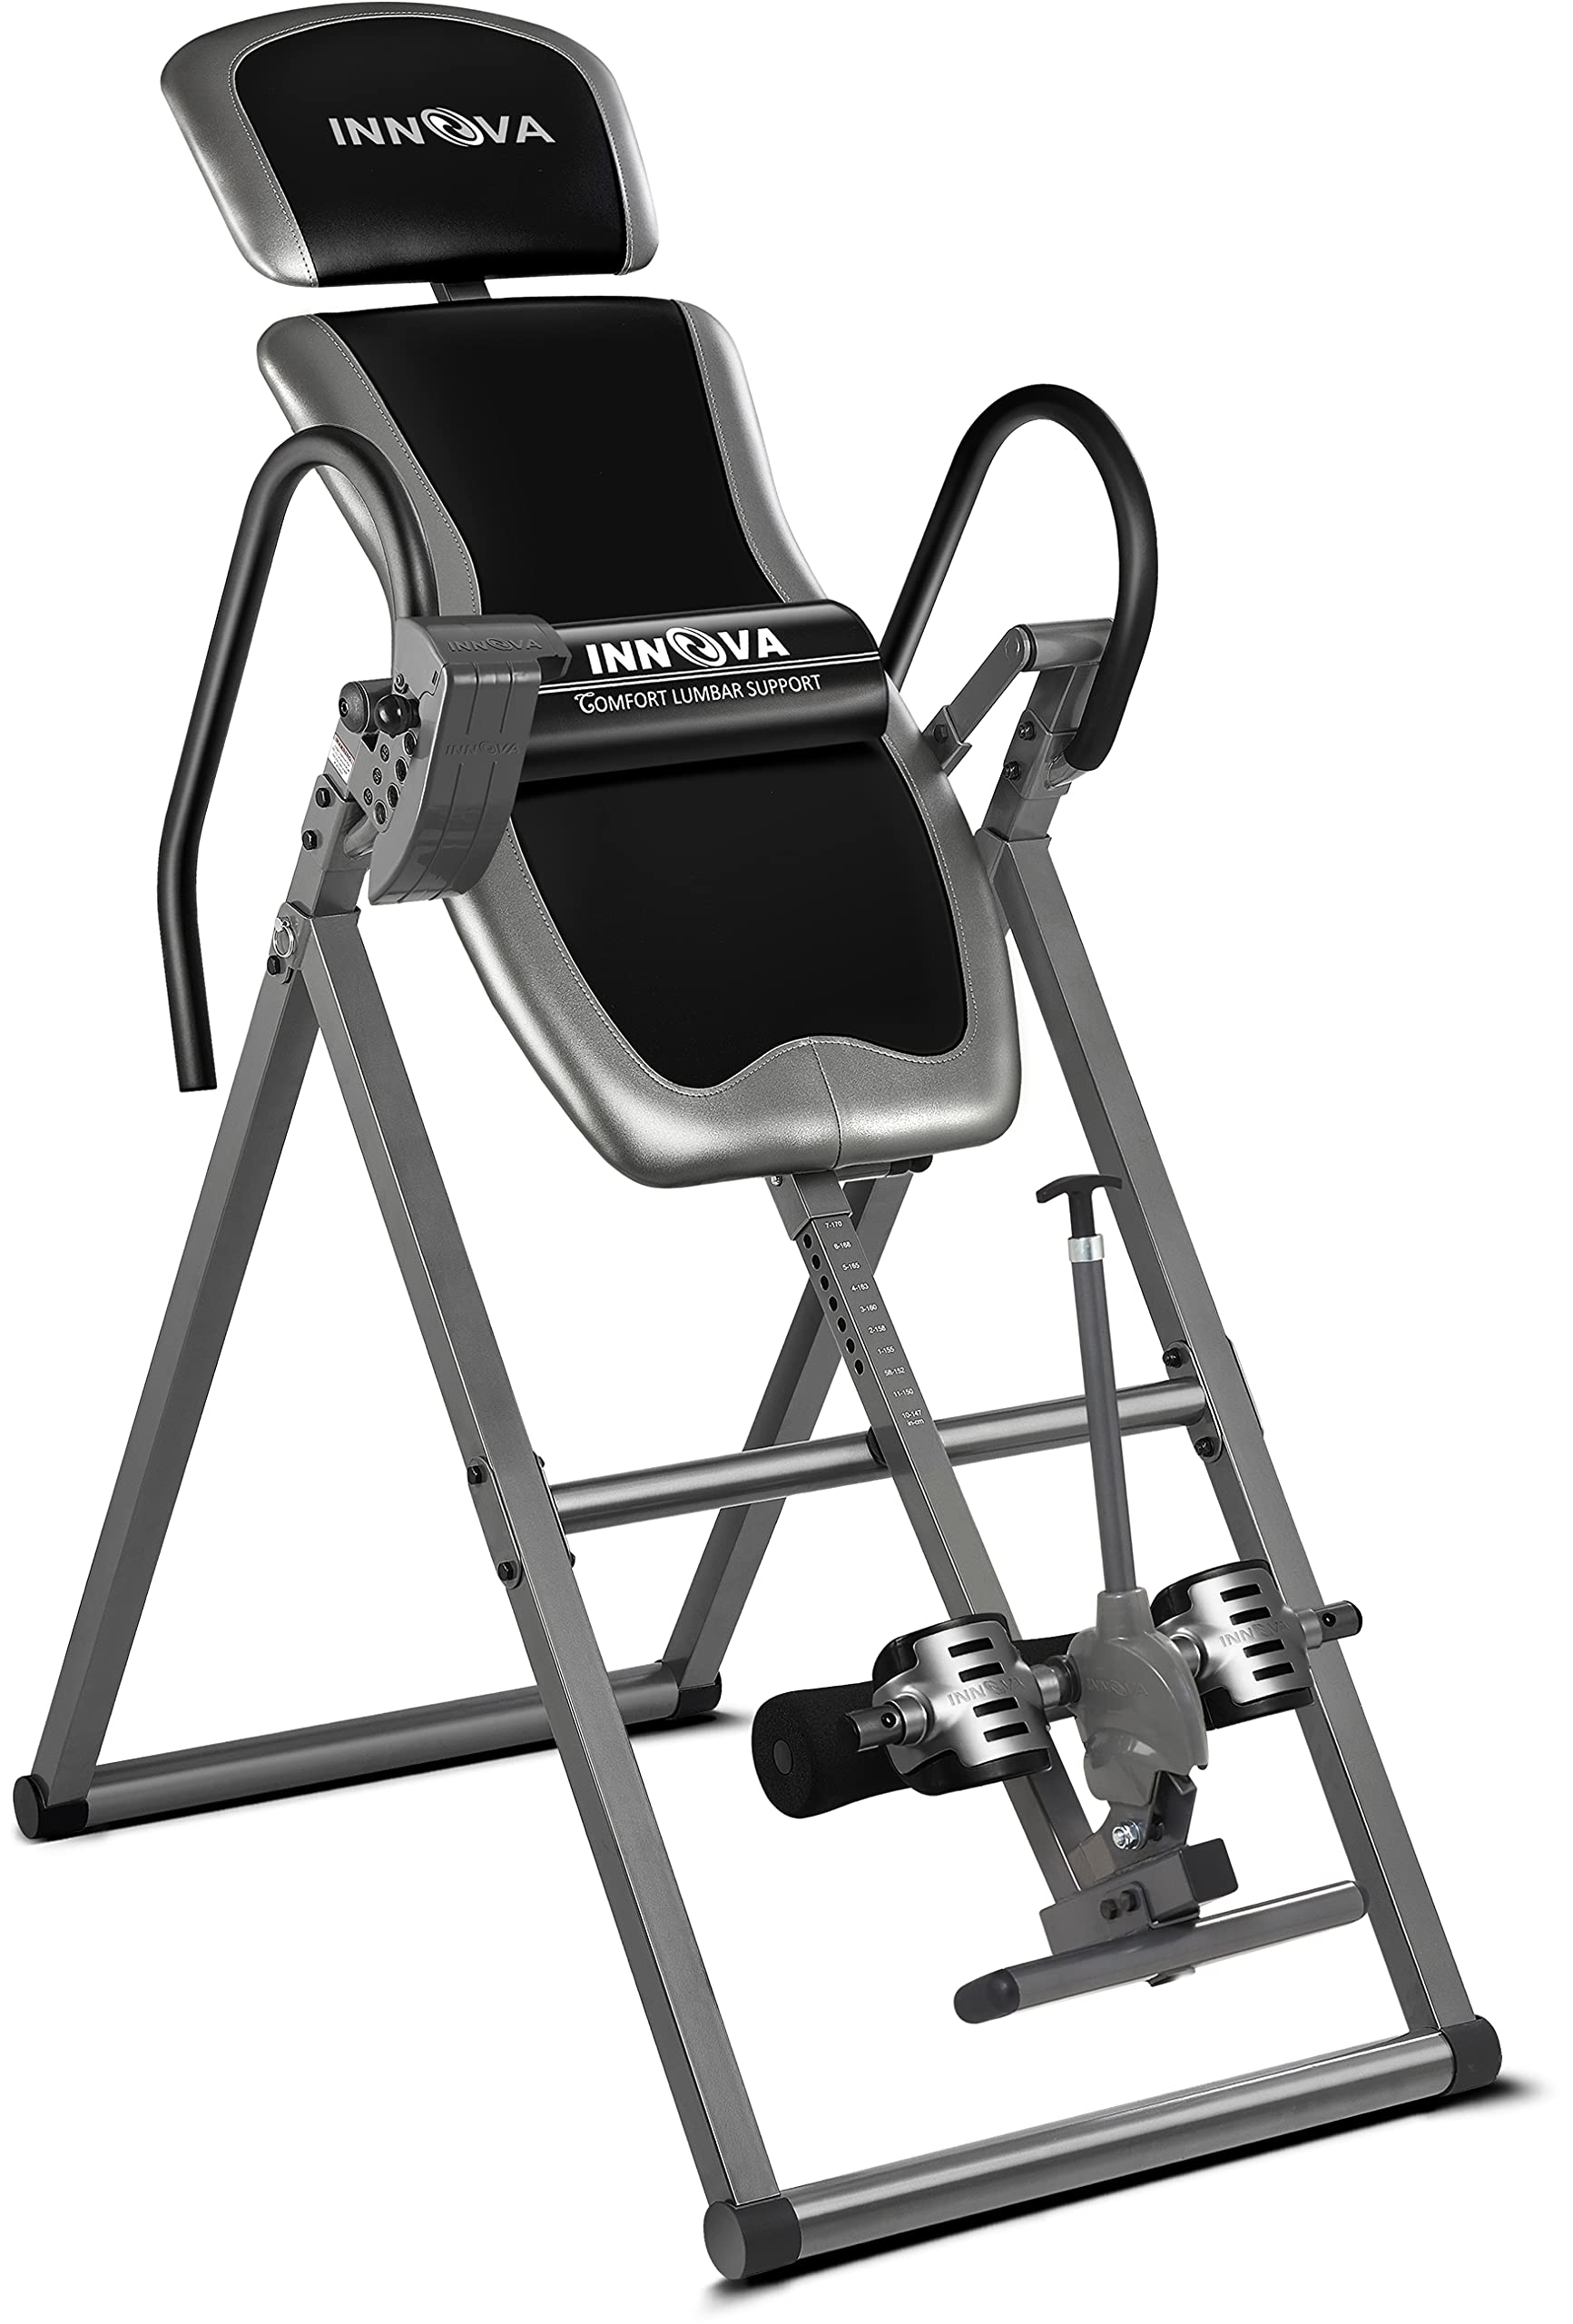 Innova Health and Fitness Innova Inversion Table with Adjustable Headrest, Reversible Ankle Holders, and 300 lb Weight Capacity